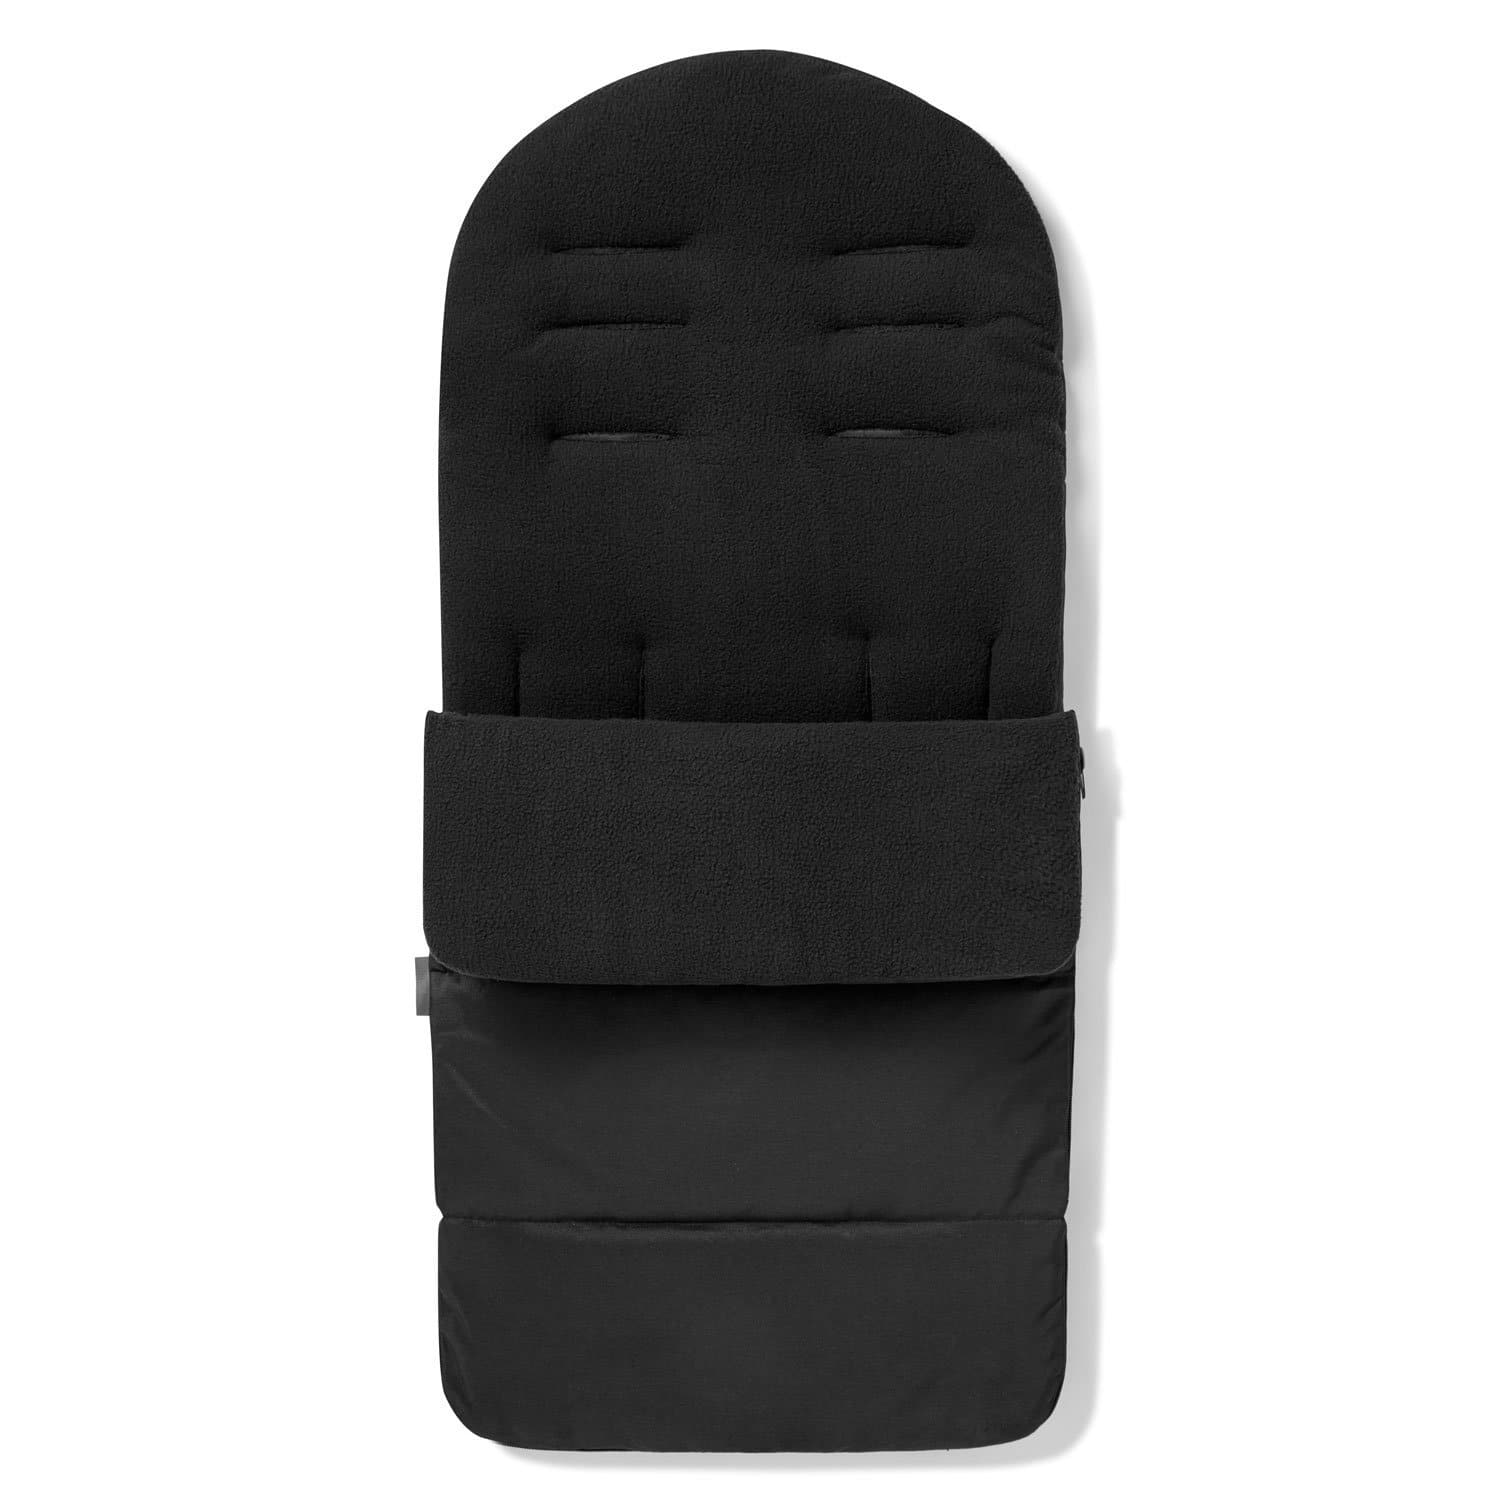 Premium Footmuff / Cosy Toes Compatible with Baby Trend - Black Jack / Fits All Models | For Your Little One